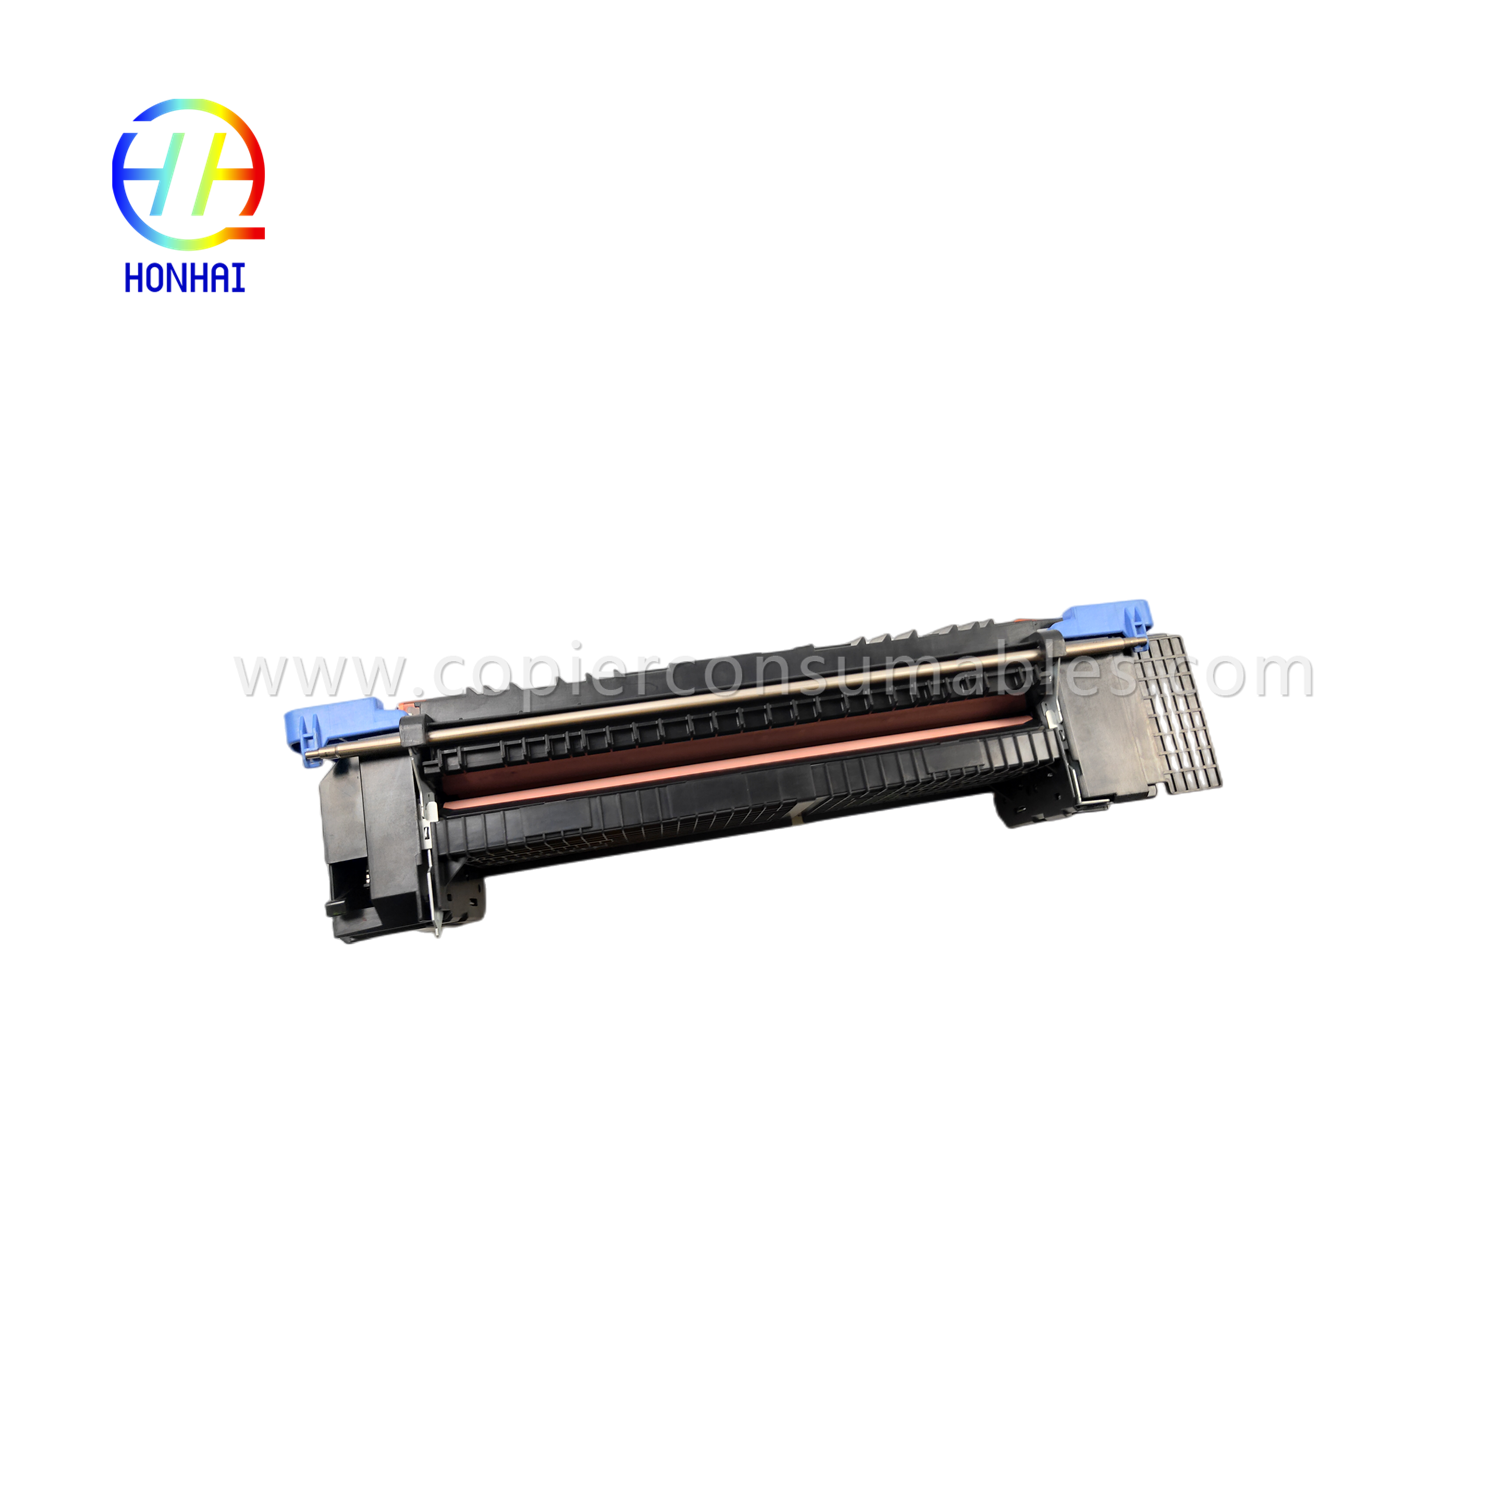 https://www.copierconsumables.com/fuser-assembly-unit-for-hp-m855-m880-m855dn-m855xh-m880z-m880z-c1n54-67901-c1n58-67901-fusing-heating-product/-assy-fixing